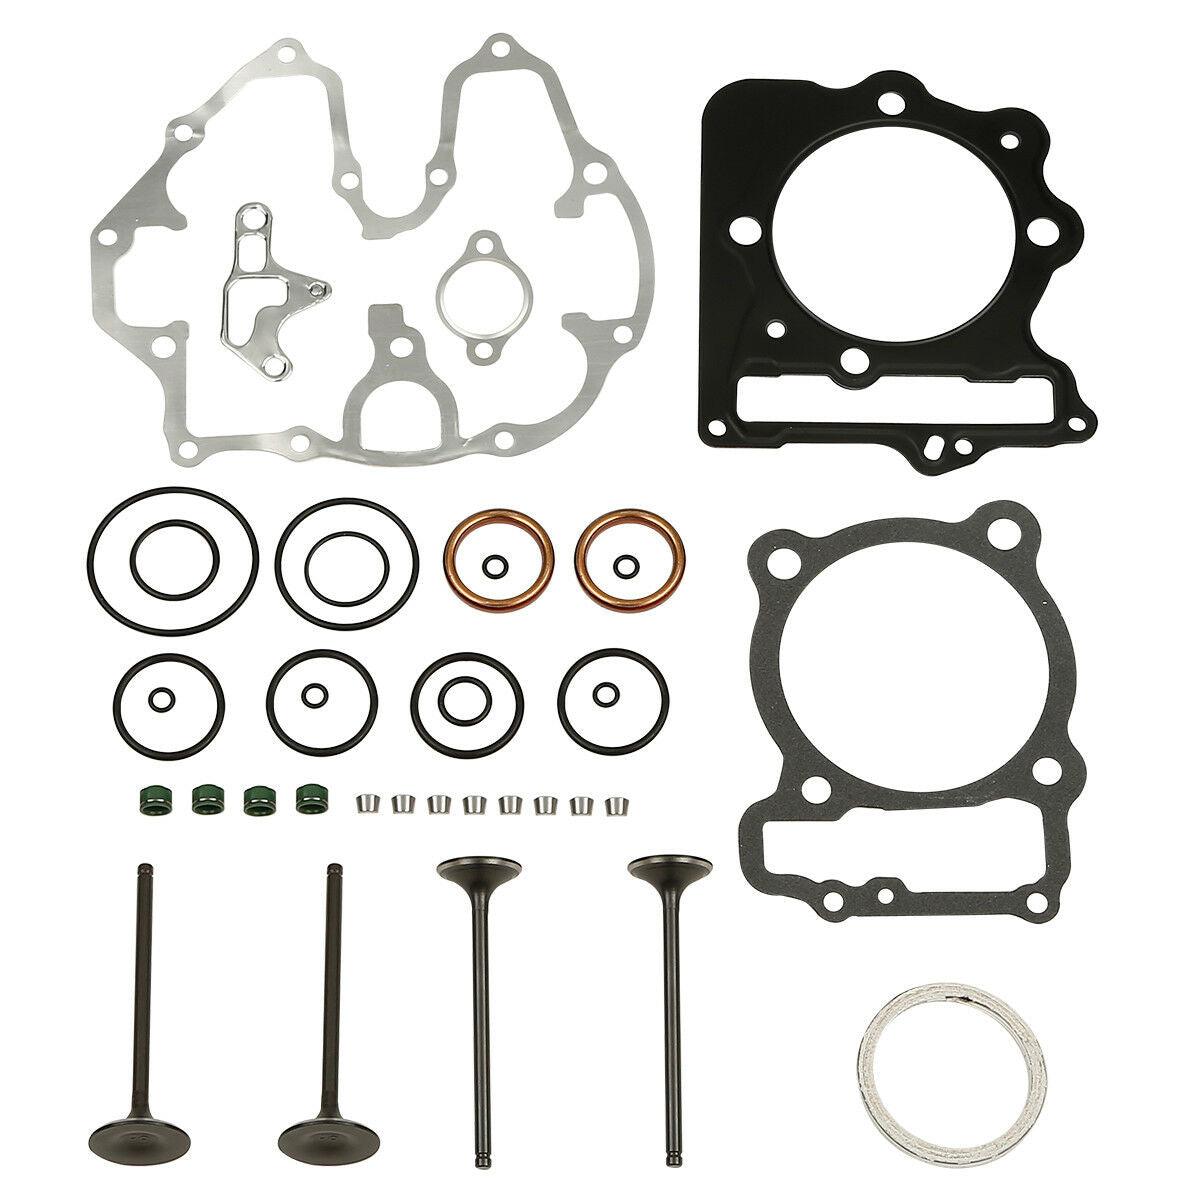 Cylinder Intake Exhaust Valve Kit For Honda Sportrax TRX400EX 400 EX 2x4 99-08 - Moto Life Products